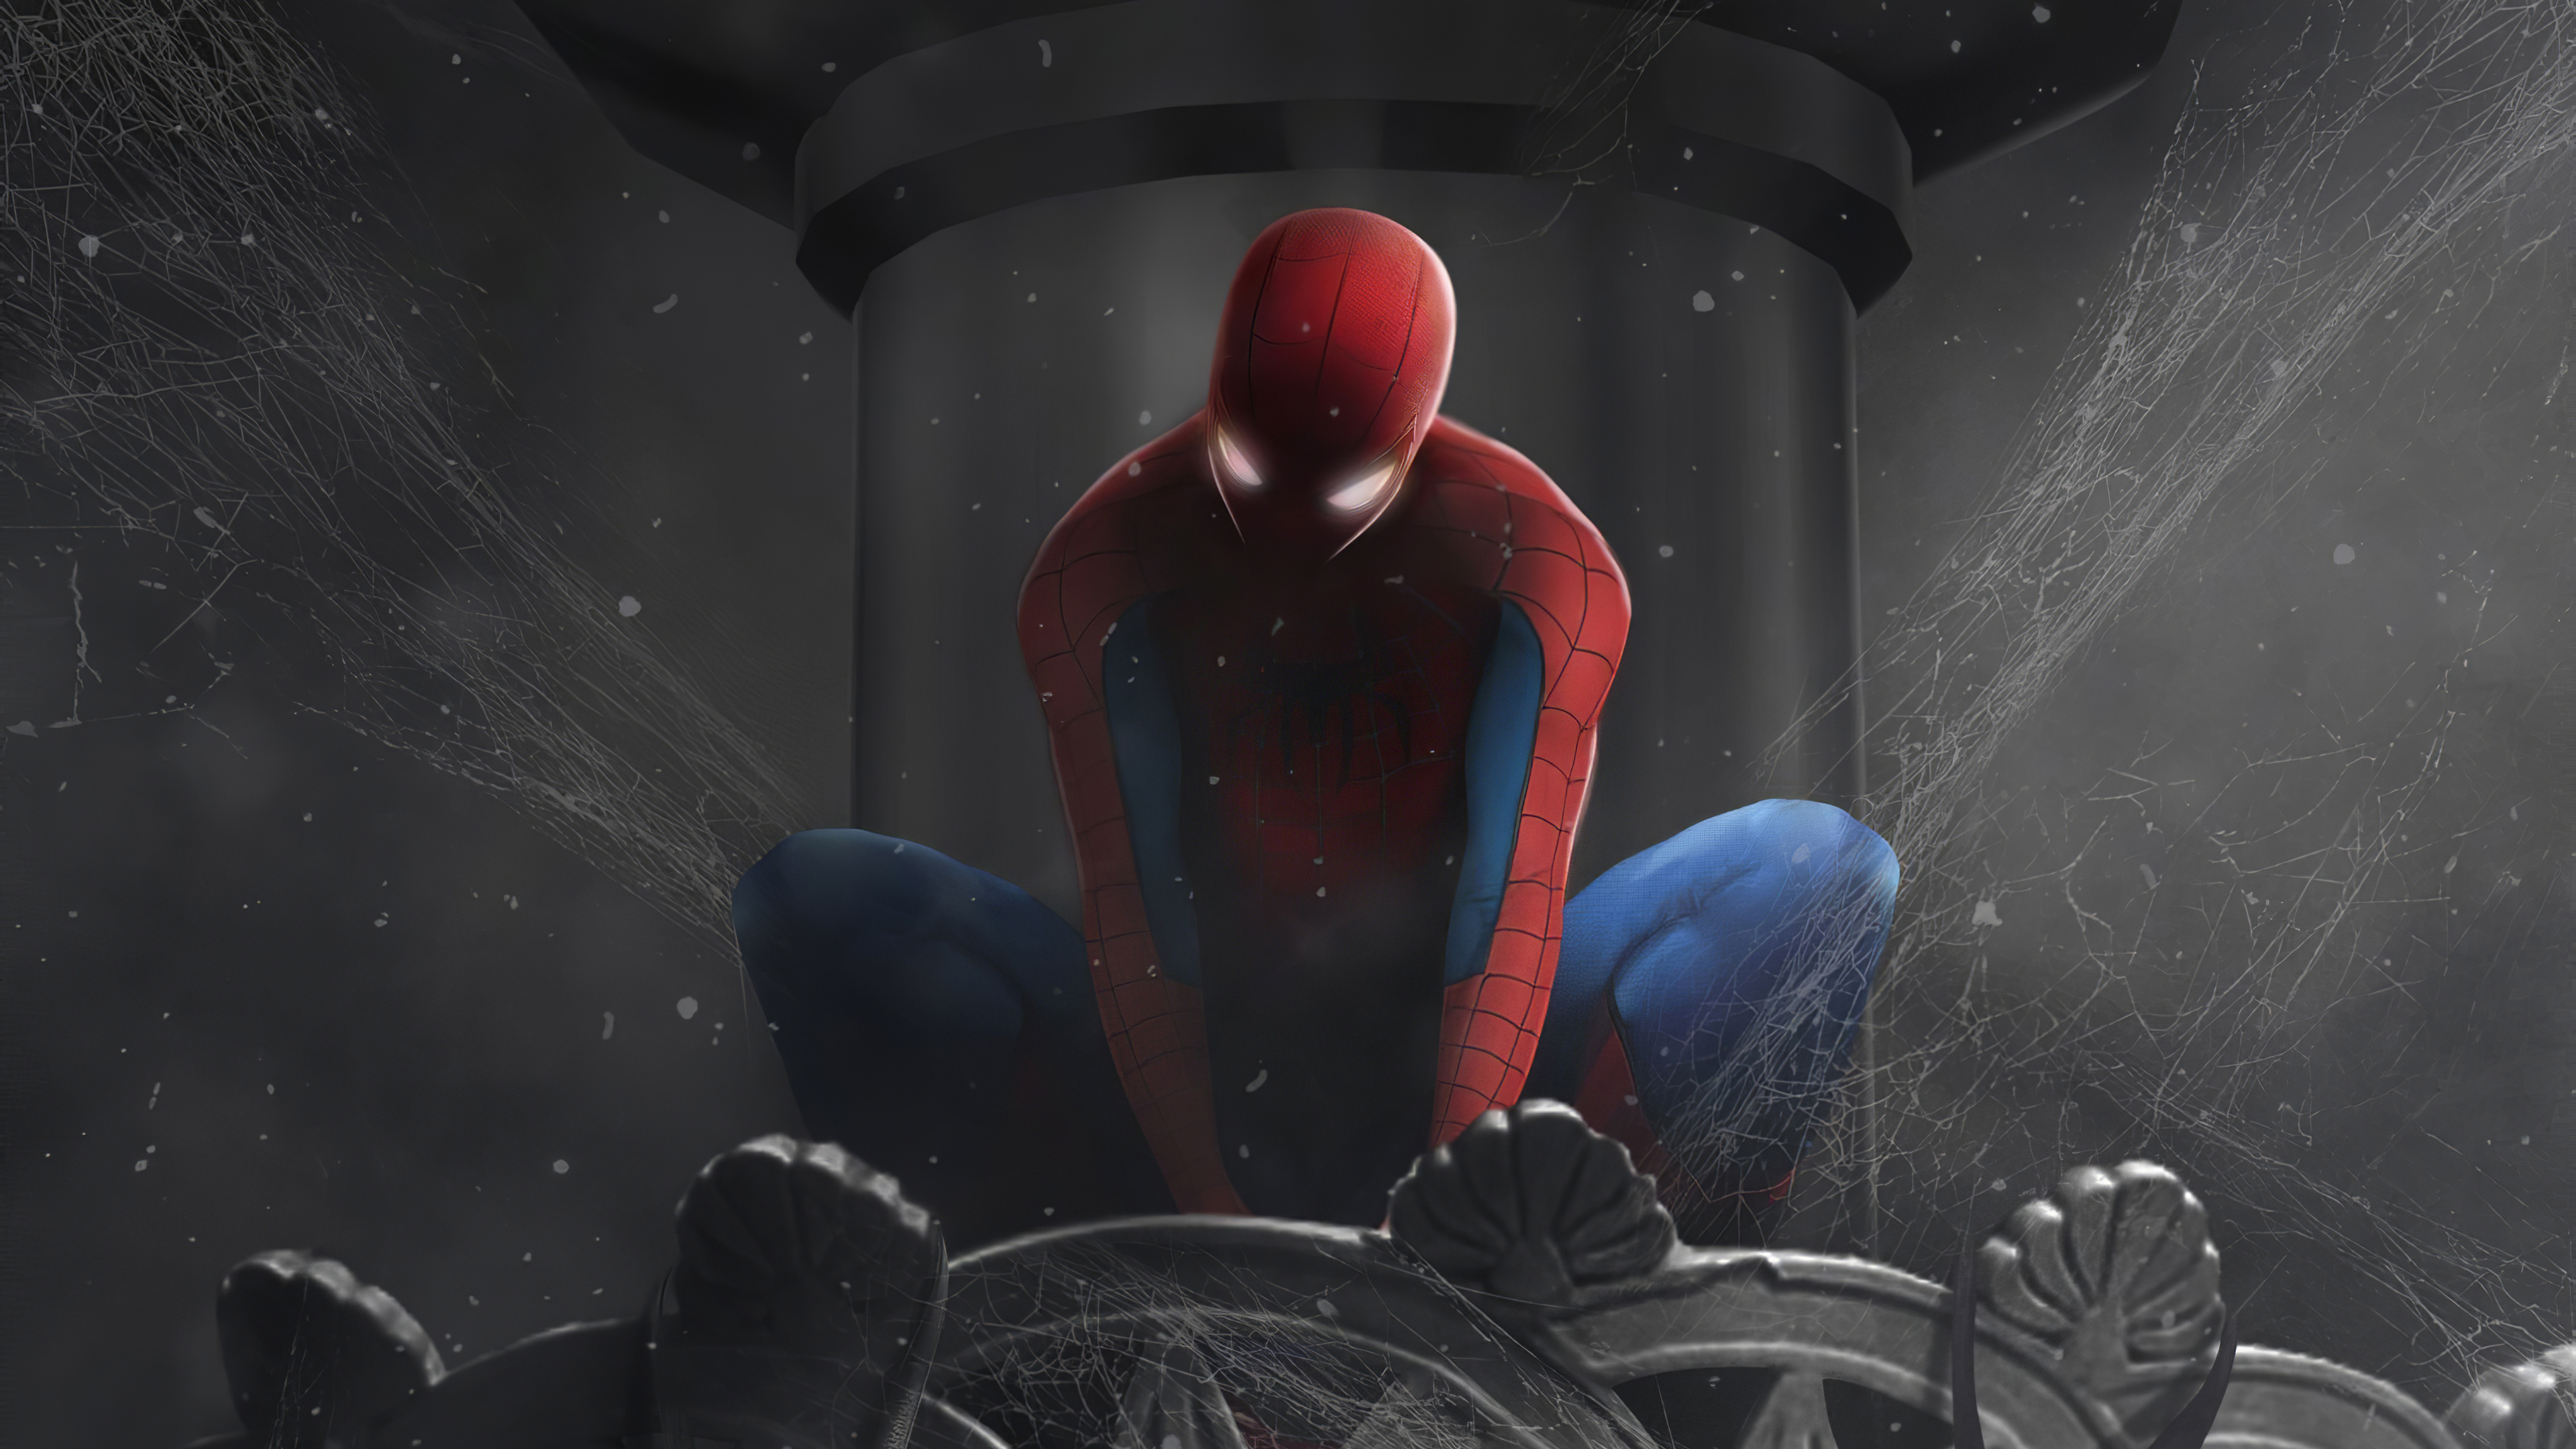 Spiderman 4k 2020 Artwork, HD Superheroes, 4k Wallpapers, Images,  Backgrounds, Photos and Pictures